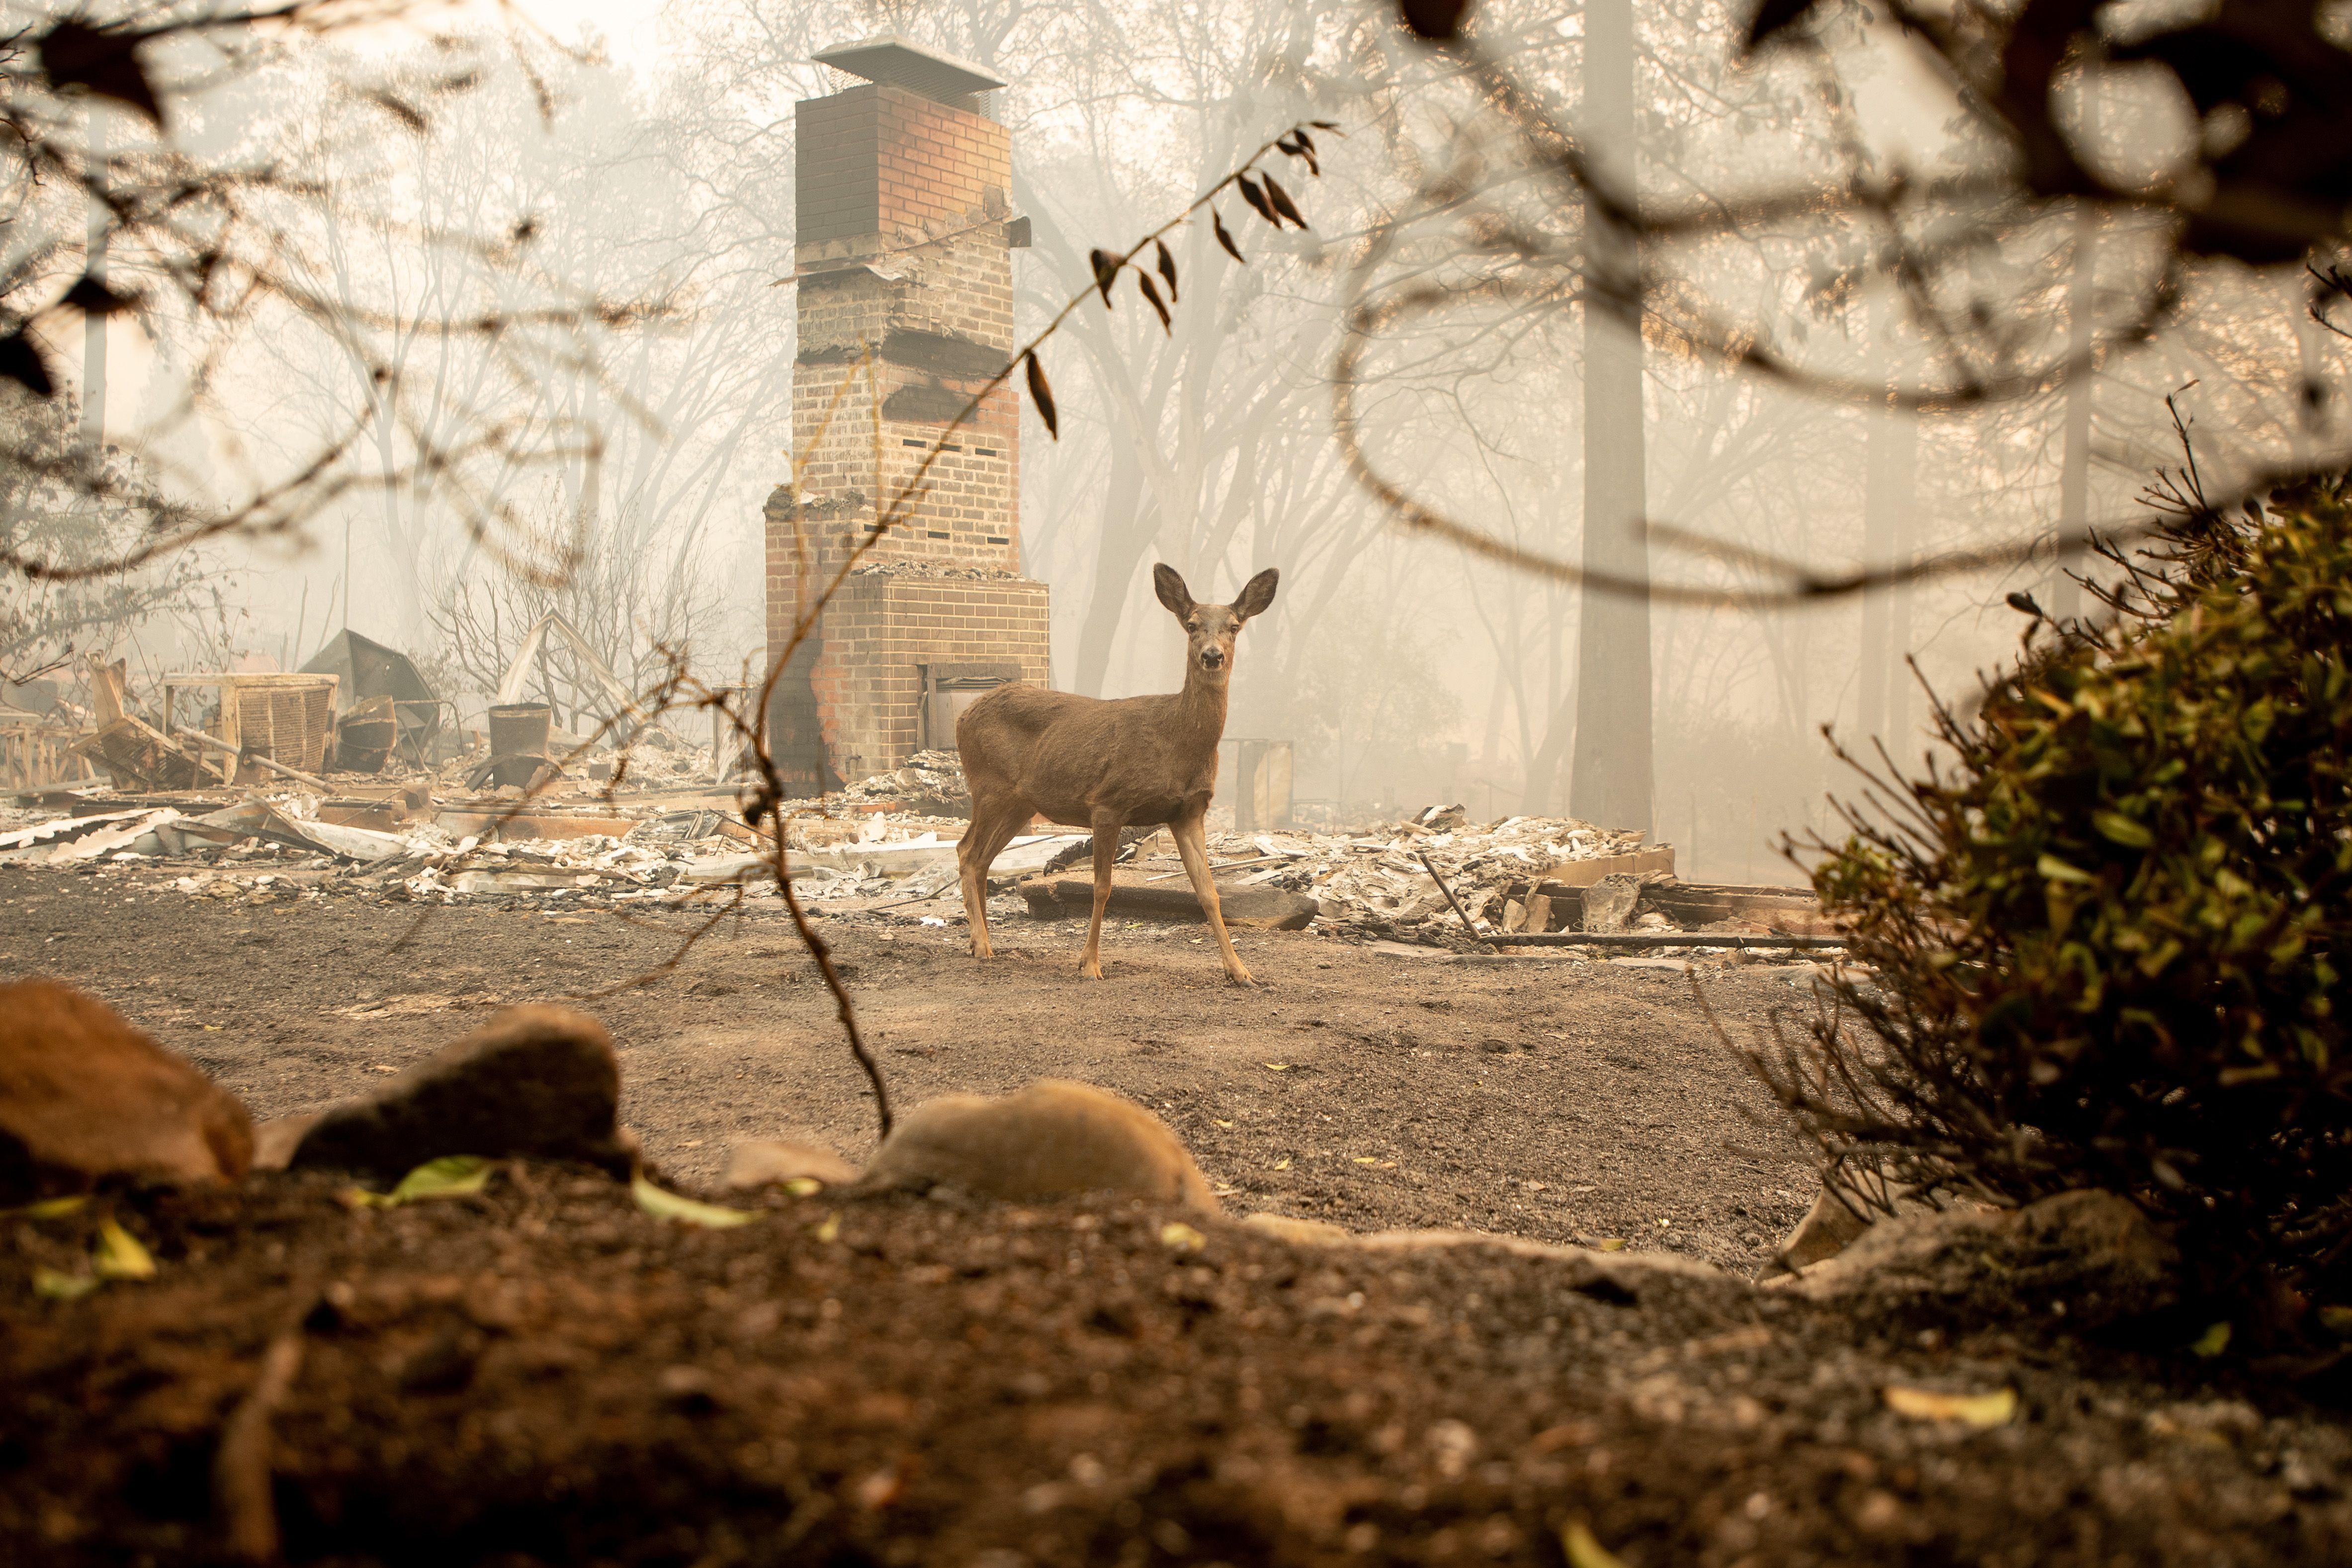 A deer looks on from a residence burned by the Camp Fire.